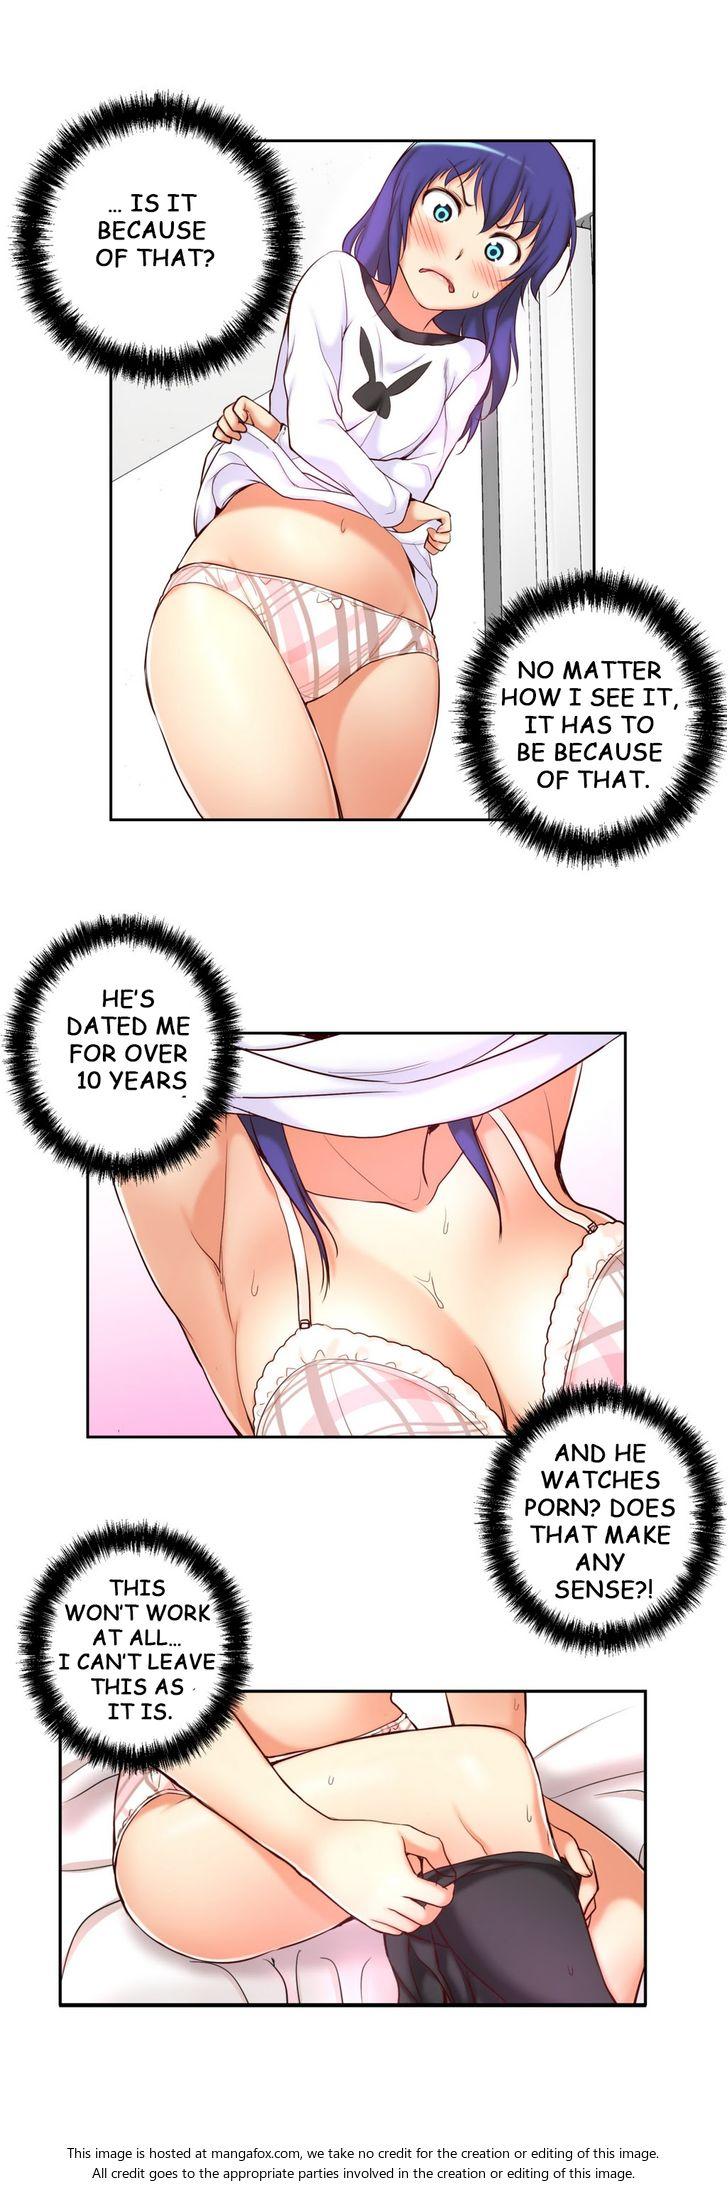 [Donggul Gom] She is Young (English) Part 1/2 688